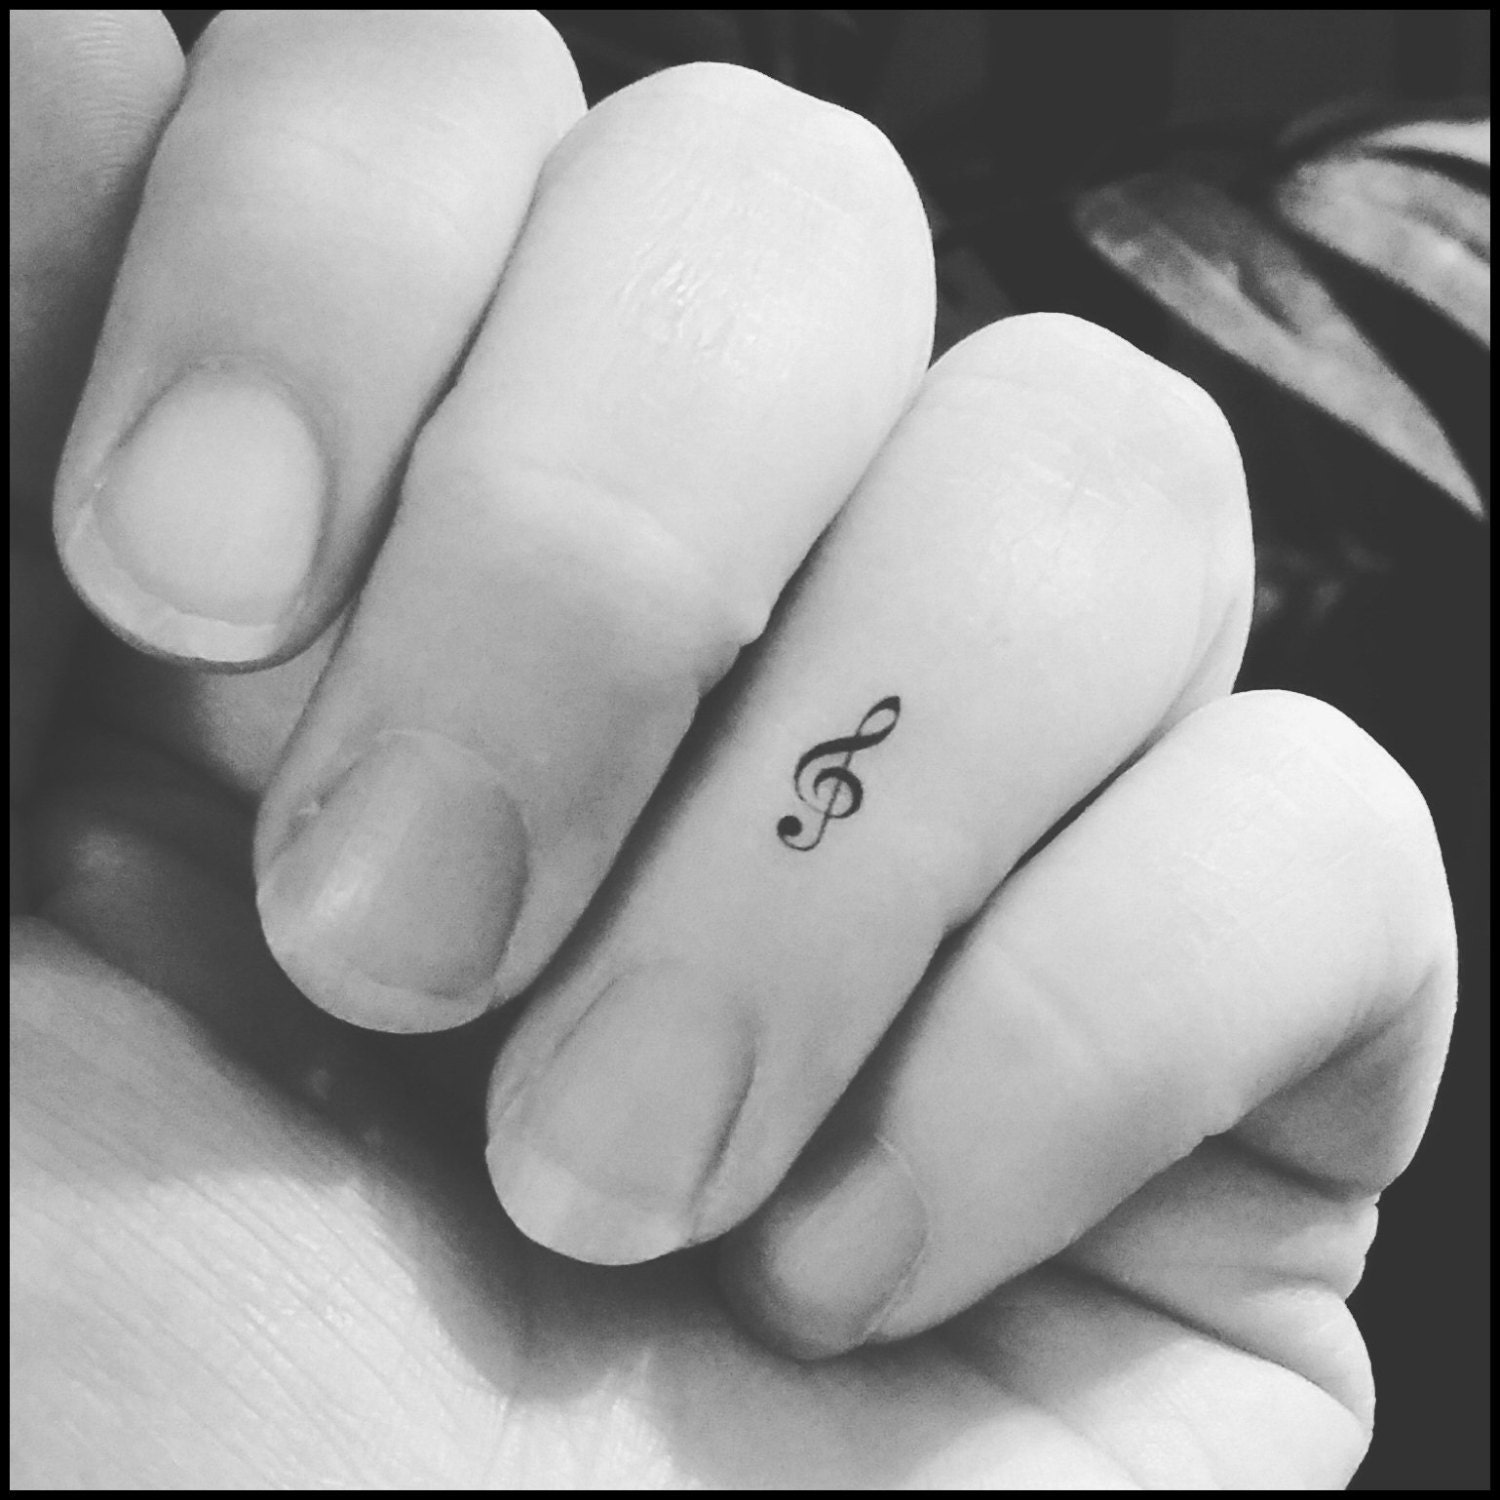 Xpose Tattoos Jaipur - Music is my life. Musical notes tattoo on fingers  Contact📞: +917568000888 Website: https://www.xposetattoos.com Address: 3rd  floor, Crystal Palm Mall, 22 Godam Circle, Jaipur YouTube📻 : Xpose Tattoos  Facebook👥: